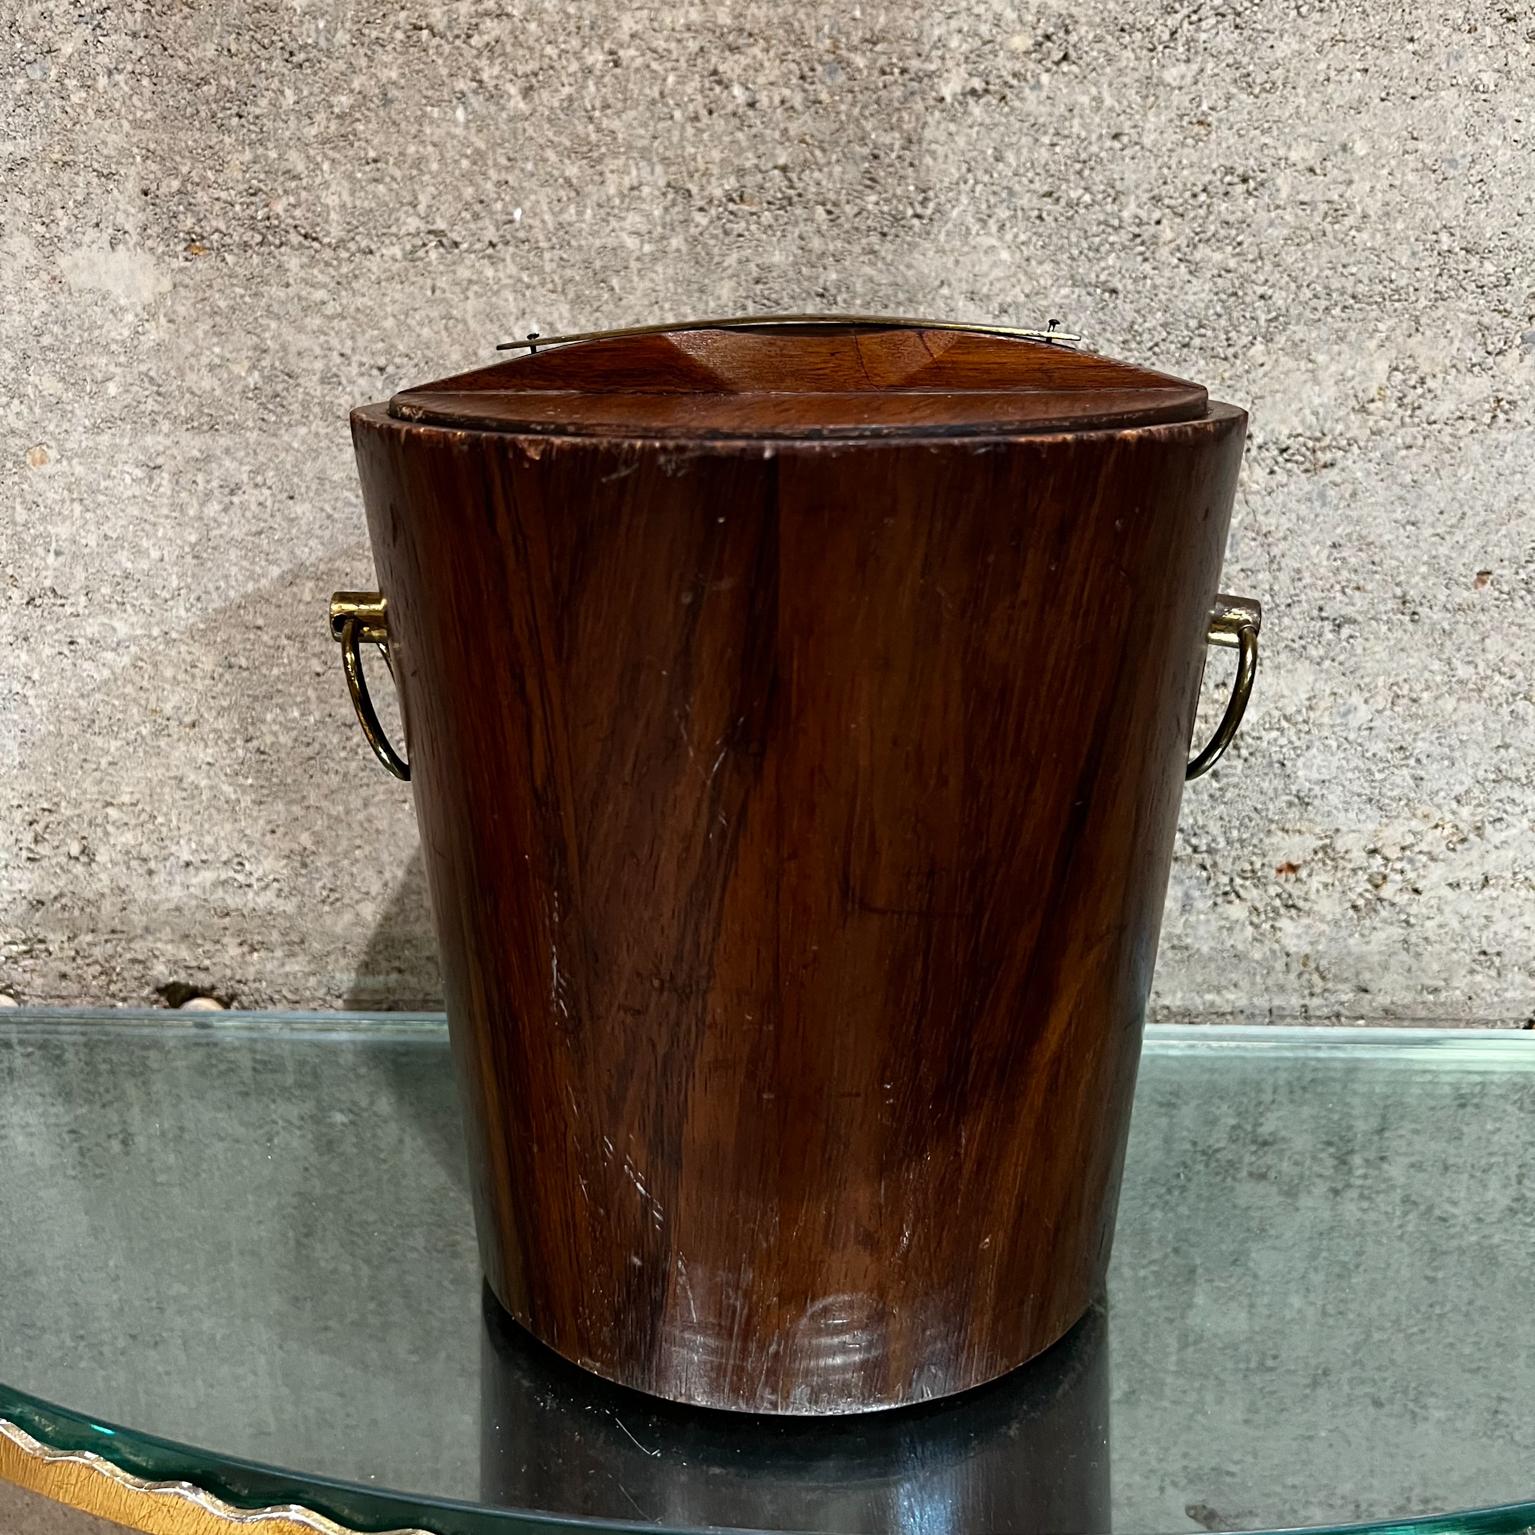 Vintage ice bucket made of solid wood with brass hardware.
Made in Mexico circa the 1960s.
Interior has original white liner bucket.
Unmarked. 
9.5 tall x 9.5 diameter
Original vintage unrestored condition. Fair shape.
Refer to all images